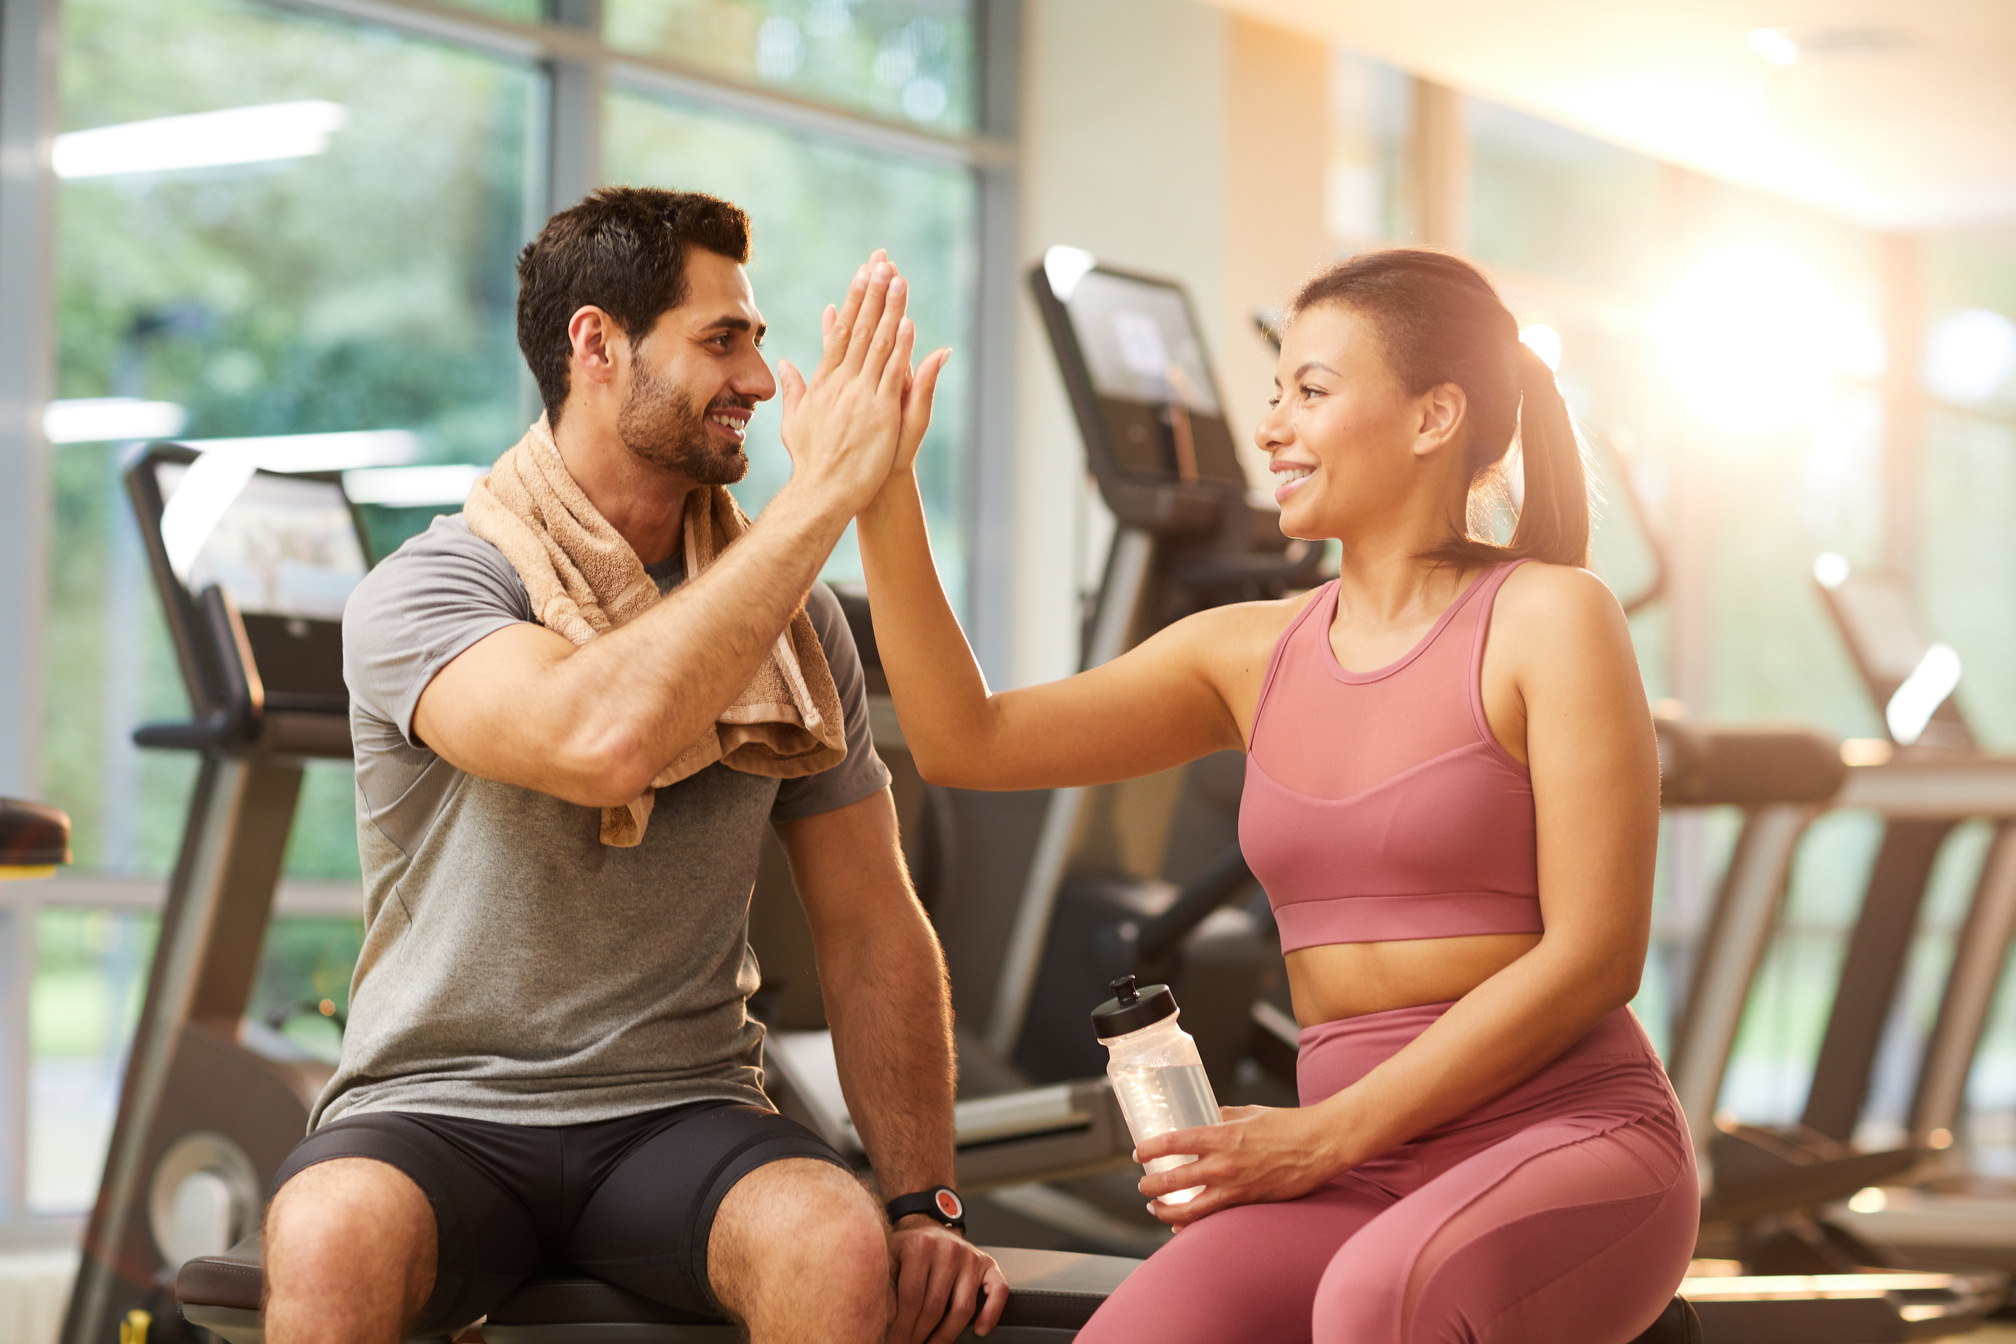 Couple High Fiving in Gym